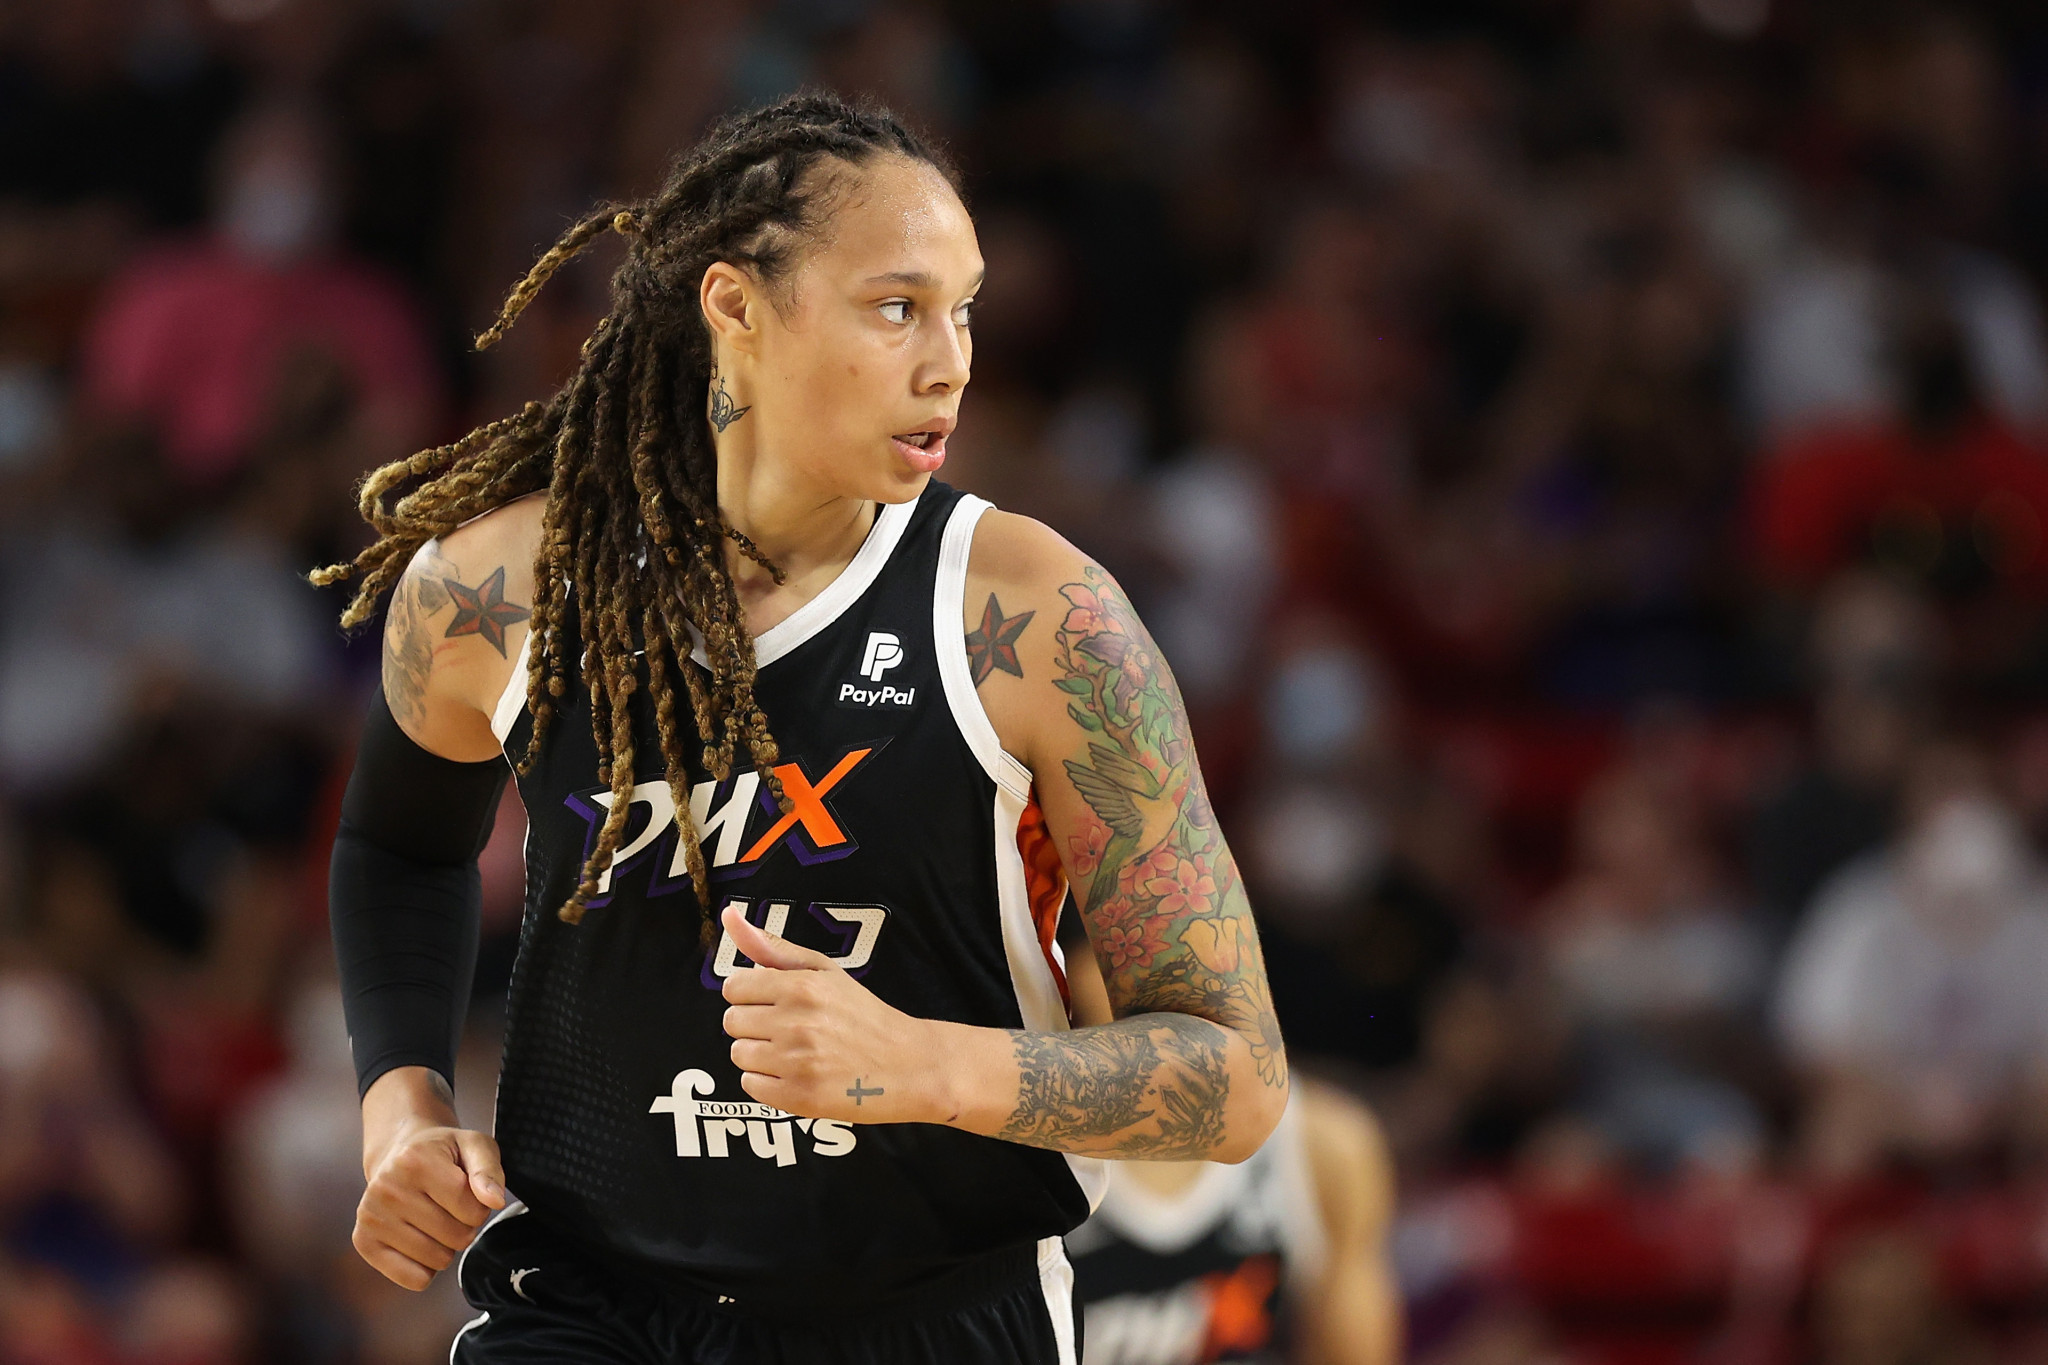 Russian basketball figures support Griner in latest court hearing